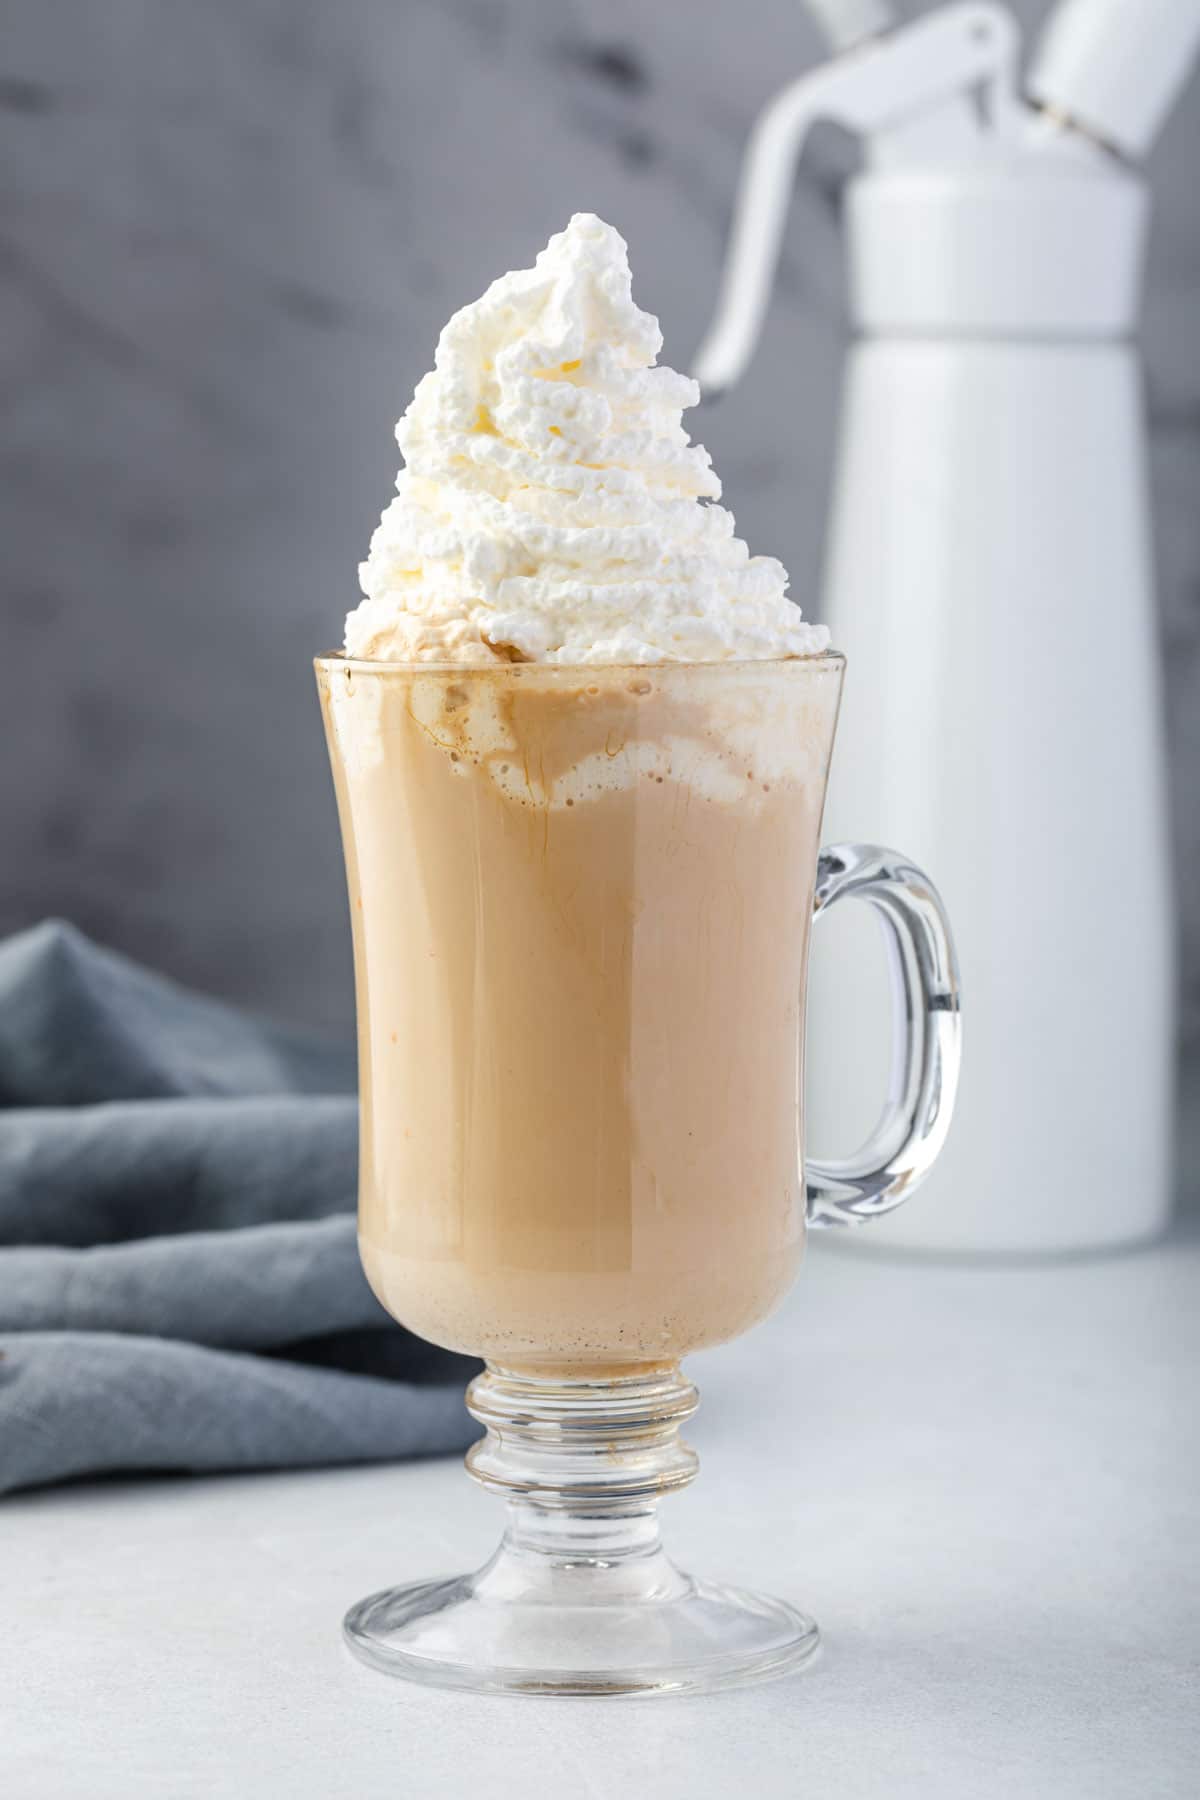 Iced coffee topped with whipped cream with dispenser in background.